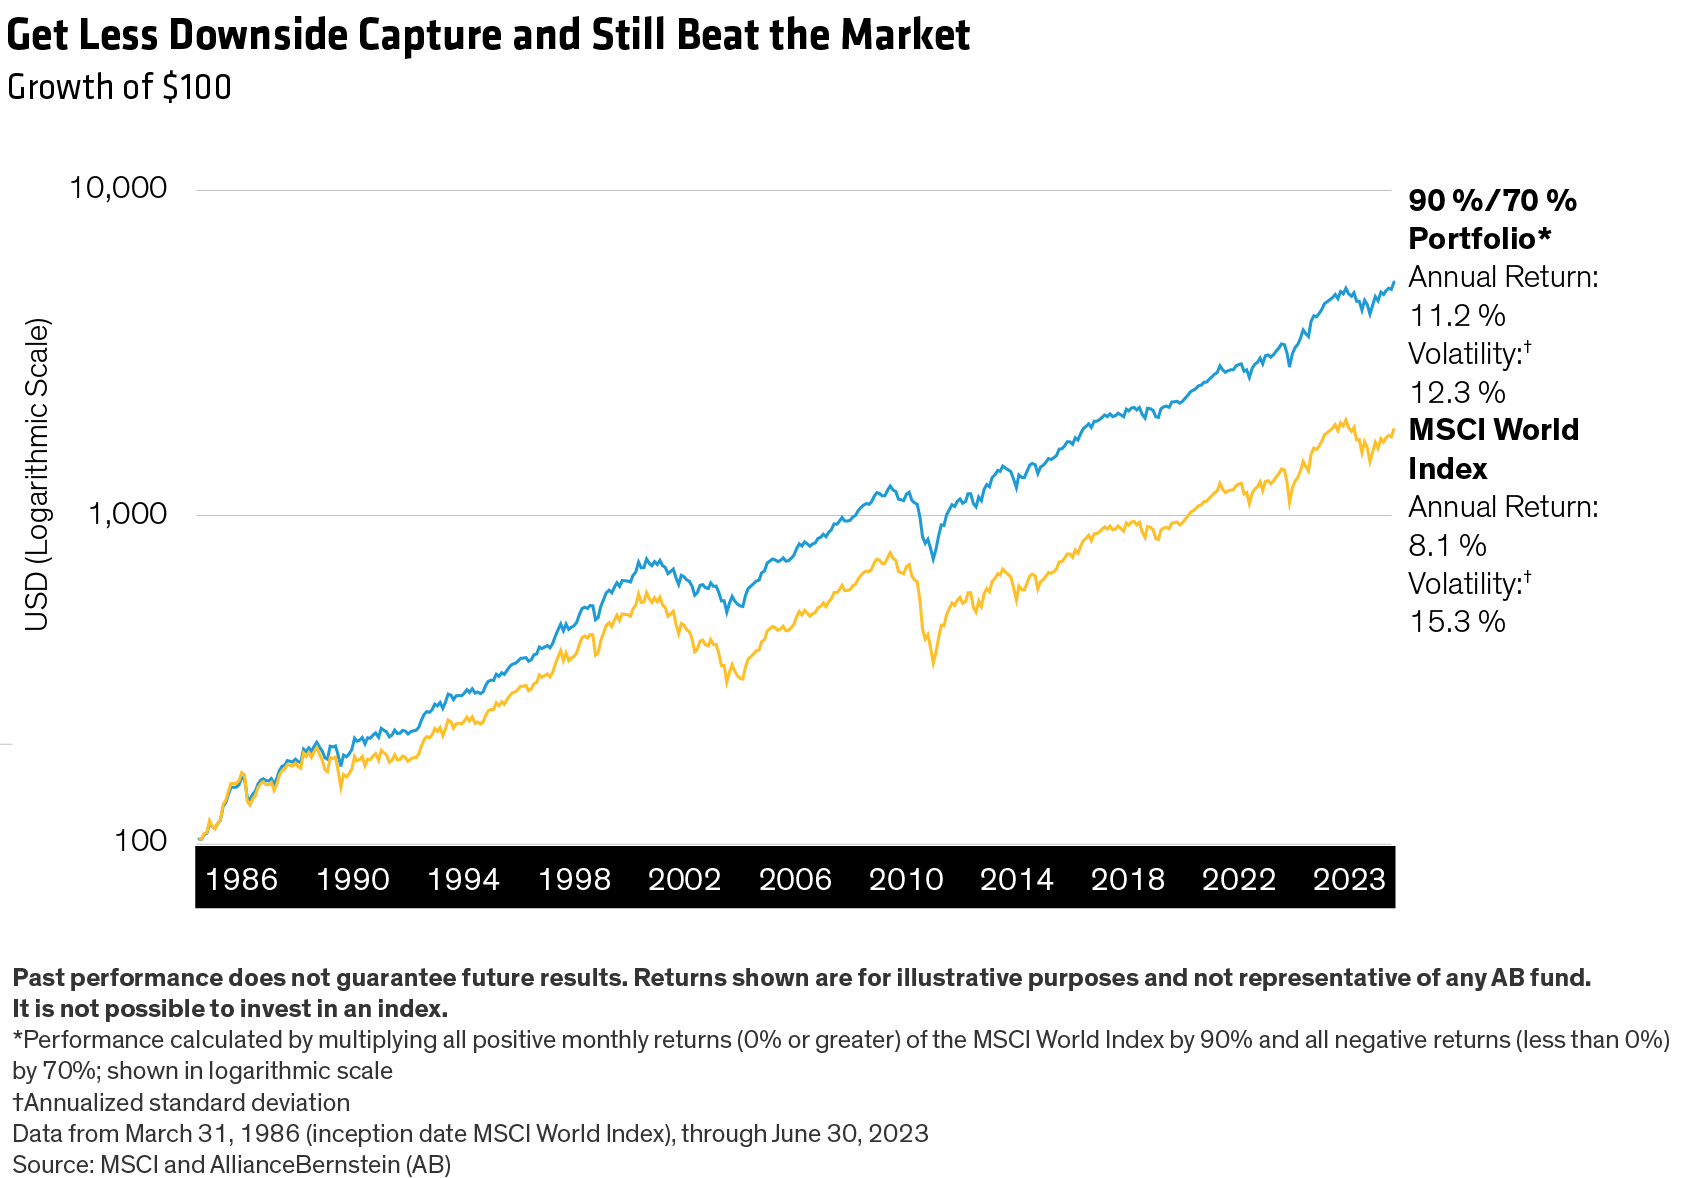 Line chart shows returns of a global portfolio based that captured 90% of market gains but only 70% of losses versus the MSCI World Index from 1986 through June 2023.